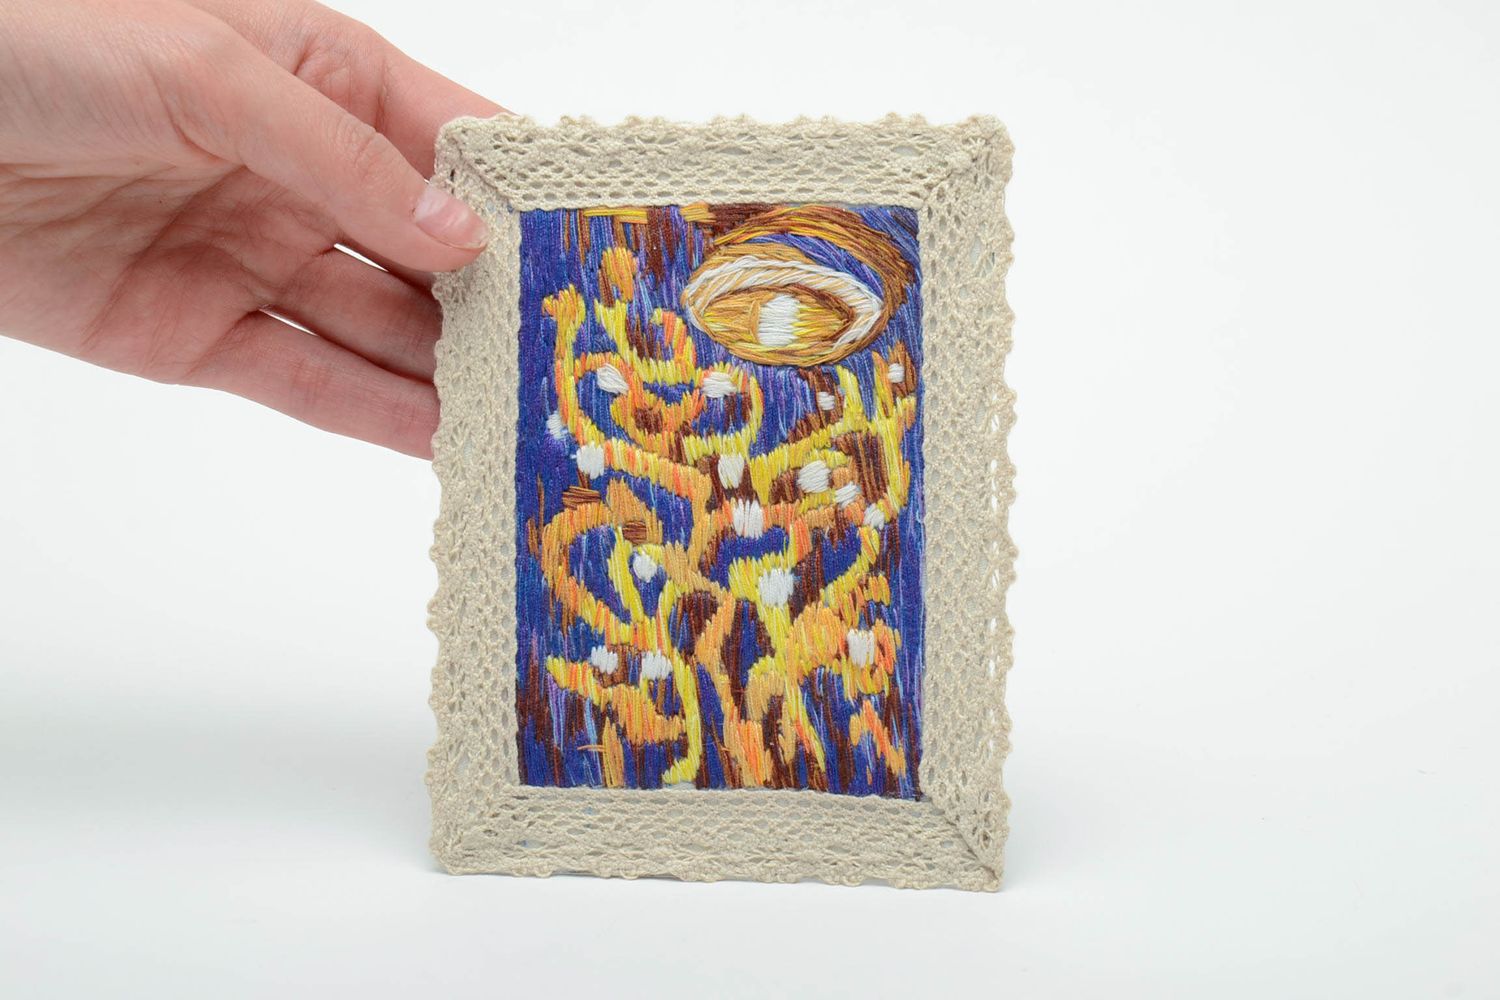 Satin stitch embroidered magnet picture photo 5